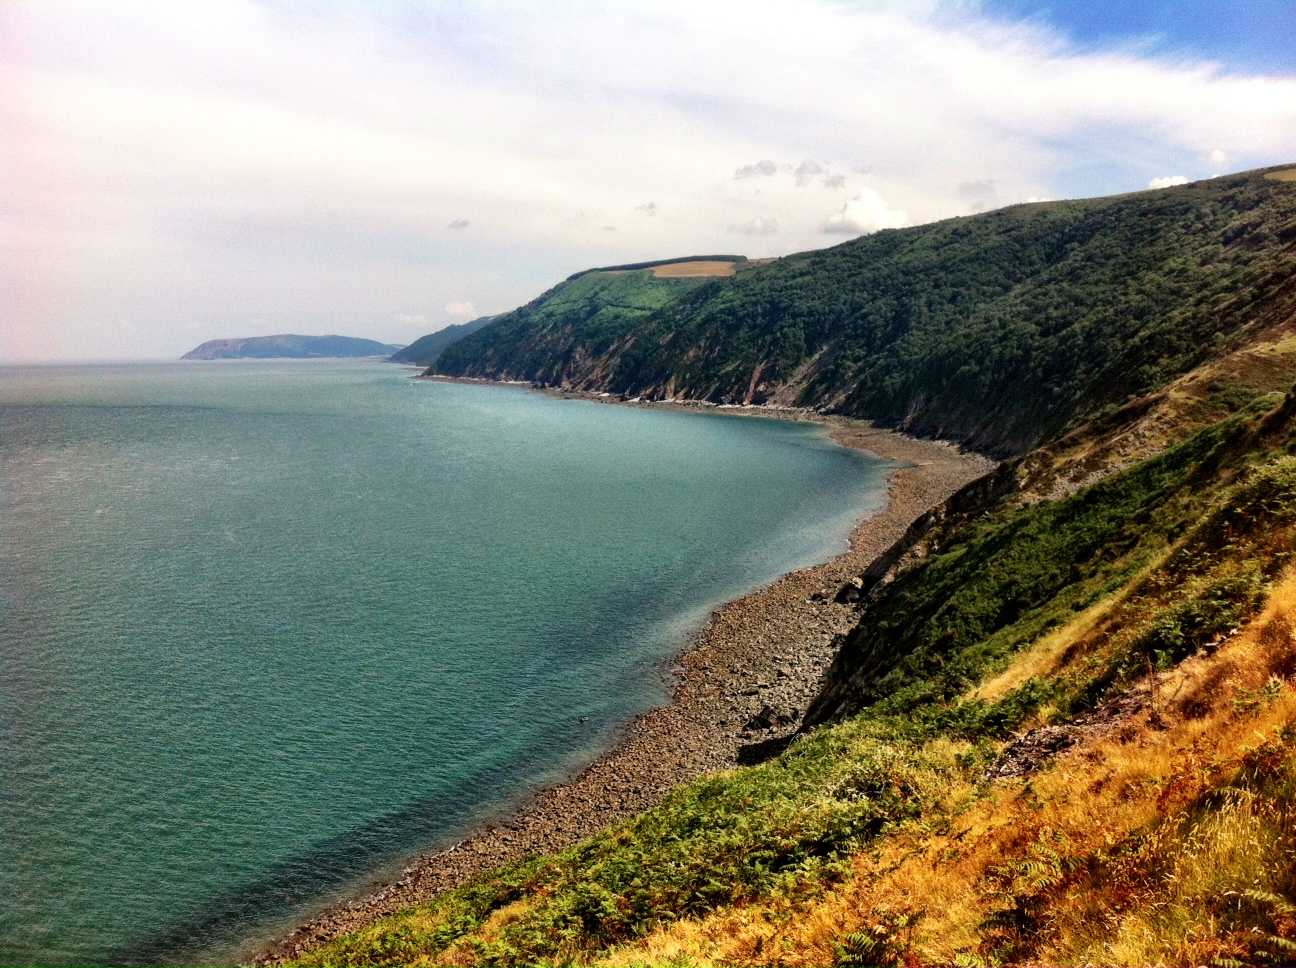 SWCP – Porlock to Lynmouth